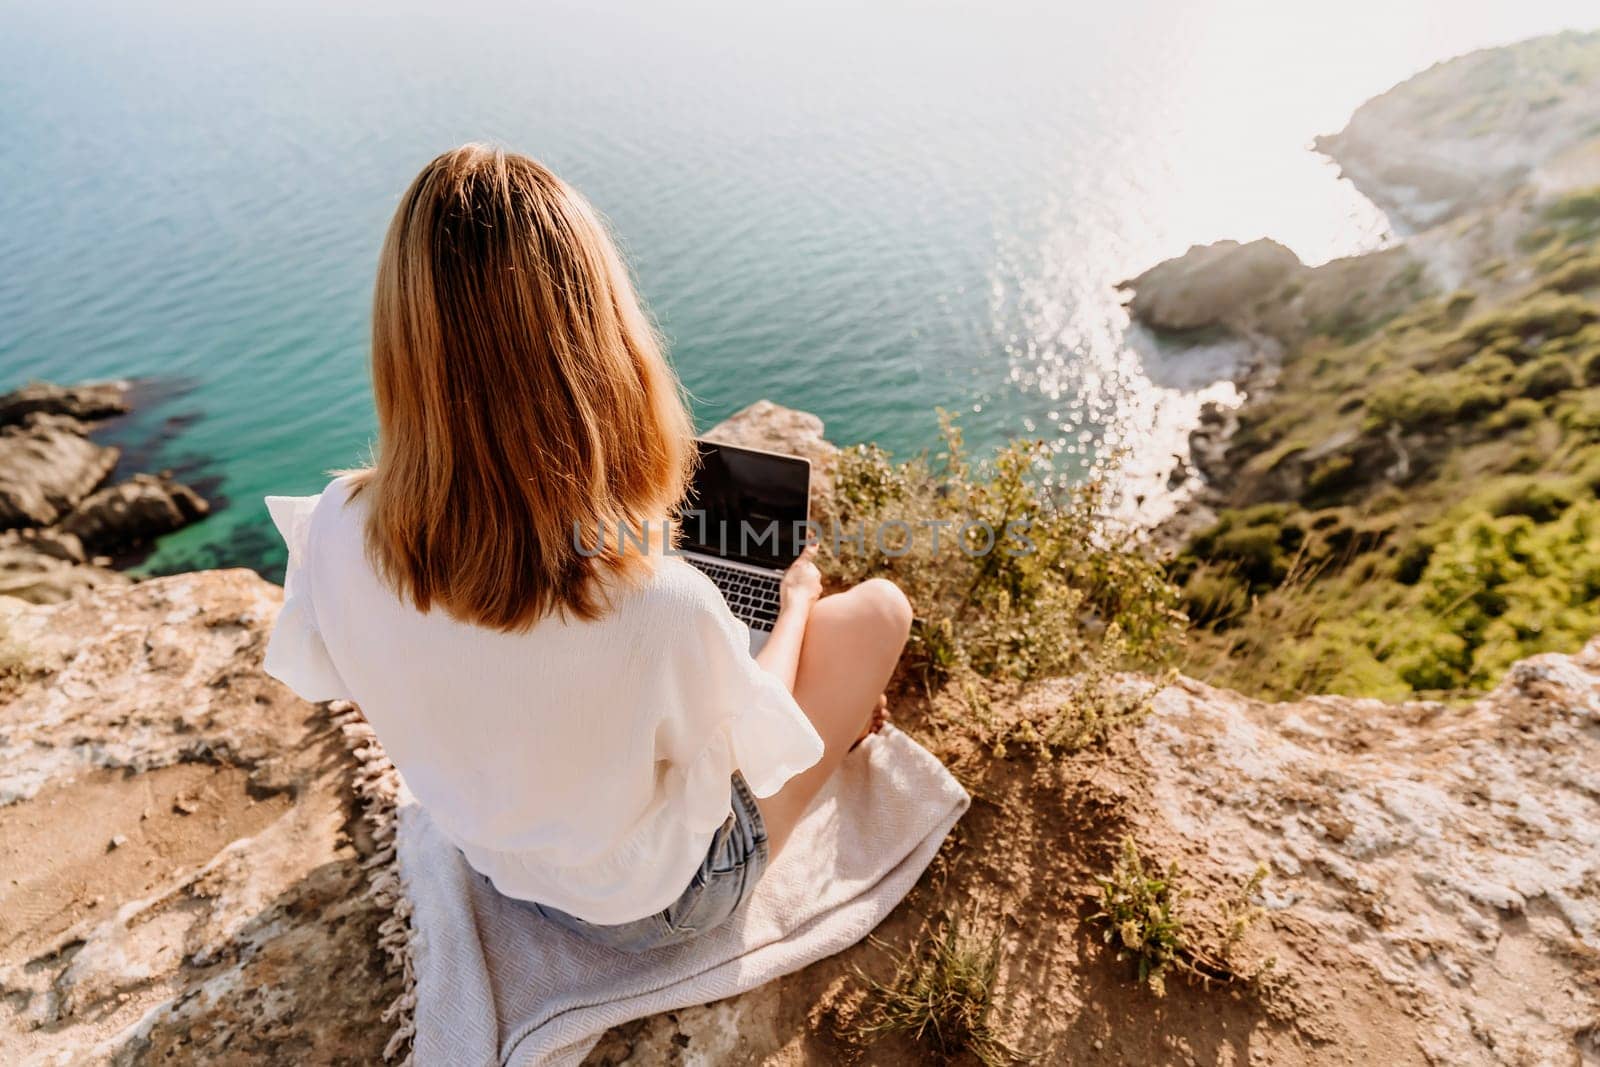 A woman is sitting on a rock overlooking the ocean with a laptop in front of her. She is enjoying the view and the peacefulness of the location